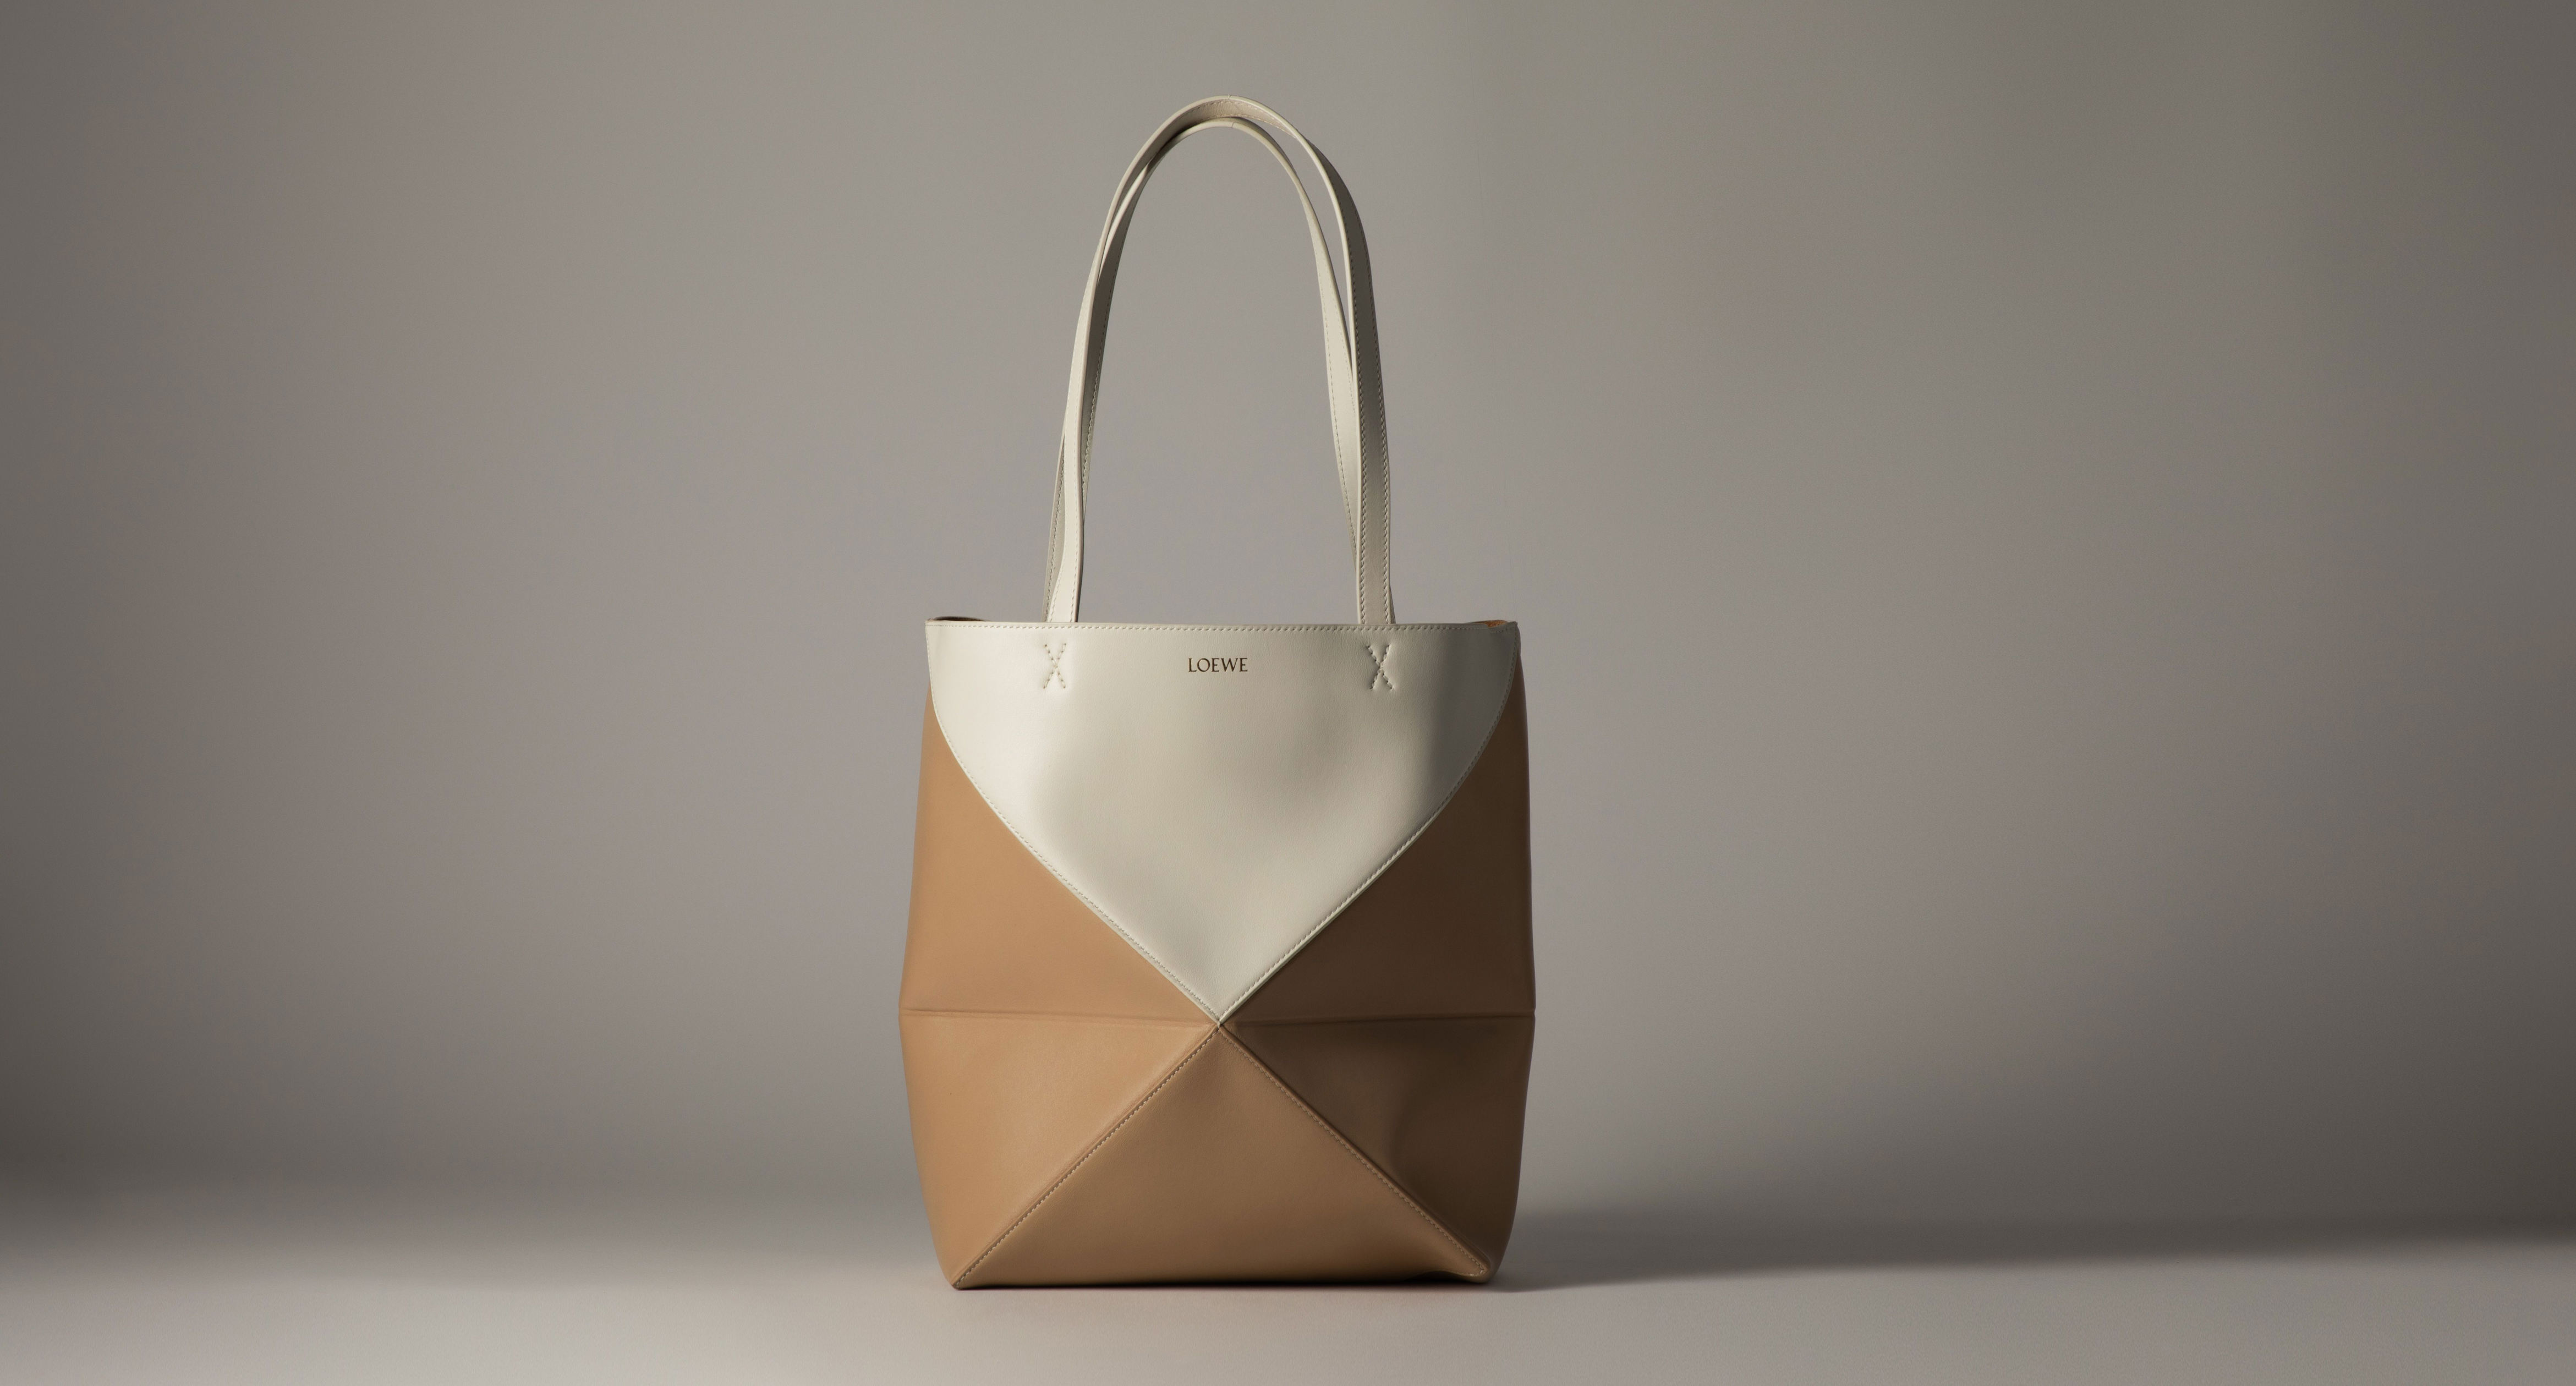 <p>Here at ELLE, we believe in tote bags—of any variety, really, but especially in designer tote bags. As modern-day working girlbosses women, we can only do it all and have it all if we quite literally “have it all” on hand. Any bag I purchase needs to serve as my <a href="https://www.elle.com/fashion/shopping/g39970546/best-work-bags-for-women/">work bag</a>, gym, lunch, diaper, and shopping bag simultaneously. Translation: It has to have space. Totes are great for this, and to prove my point, I spoke with Blake Geffen, CEO and co-founder of Vivrelle, a designer bag rental service, to get a non-partisan take on which totes are really all that. </p><p>An avid tote user herself (she’s a mother of three), Geffen confirms that a designer tote is a great investment option for anyone looking to start—or expand—a high-end collection. As for what to look for in a tote, durability is definitely key. “Both designer and non-designer bags should always be judged by the quality–from fabrics and construction to the stitching and zippers, buckles, etc.,” she says. “Our tote bags are constantly in motion, so it’s important that the one you’re using can endure your day-to-day comings and goings.” </p><p>You should also take lifestyle and occasion into consideration. Are you more into <a href="https://www.elle.com/fashion/shopping/g43829679/best-canvas-tote-bags/">canvas totes</a> or <a href="https://www.elle.com/fashion/shopping/g39563033/best-leather-totes/">leather</a> ones? “Compartments and zipper pockets are also qualities I’m always looking for, though may be less important to others. Depending on the setting, shoppers may also want to consider fabrics and strap styles...While the trend cycle shifts quickly, nothing is more fashionable than owning your own unique sense of style. So, choosing a handbag that’s true to you is by far the most important factor when looking for your next bag!”</p><p>I took Geffen’s expertise, fellow <a href="https://www.elle.com/fashion/shopping/g43852694/best-laptop-bags-for-women/">ELLE editor recommendations</a>, size, style, and features into account to bring you a list of the 22 best designer tote bags to shop now. </p>